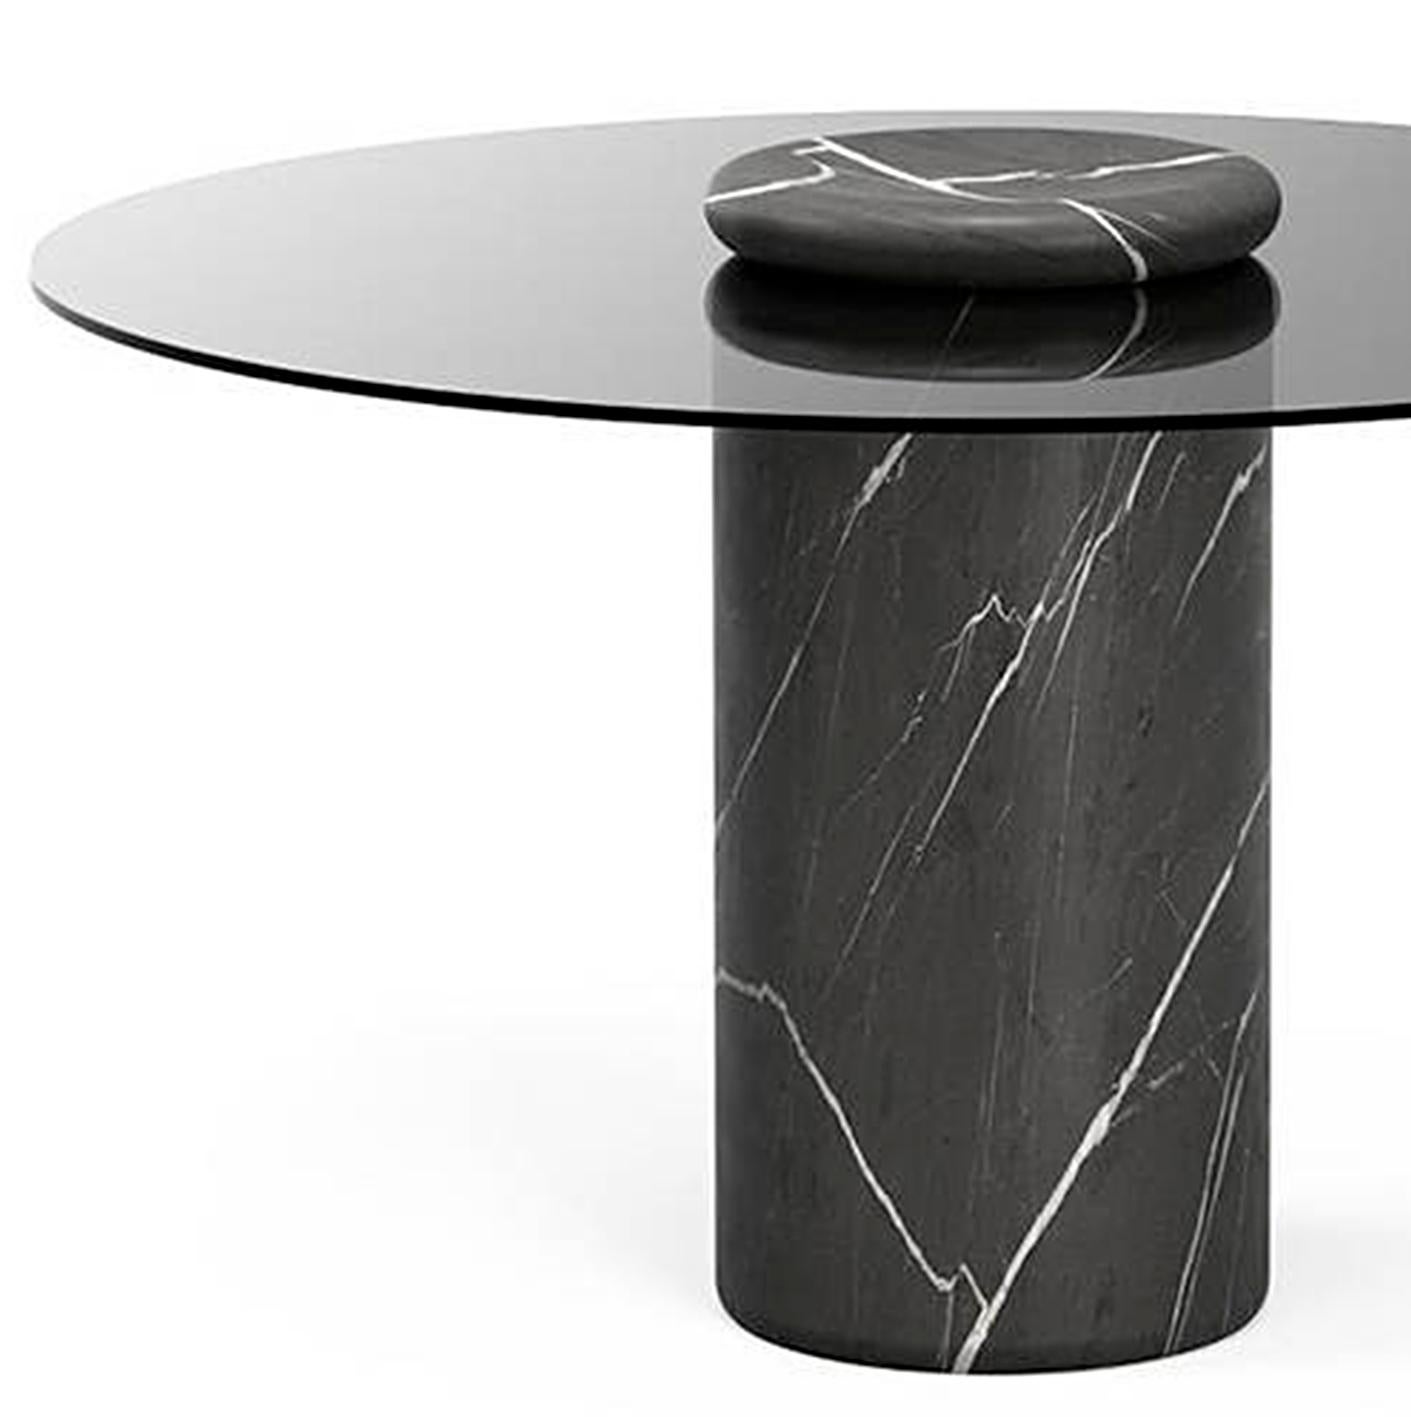 Table designed by Angelo Mangiarotti.

Castore is a glass and marble table by Italian architect, sculptor and designer Angelo Mangiarotti. Designed in 1975 for Sorgente dei Mobili, the distinct design is now presented by Karakter, available as a